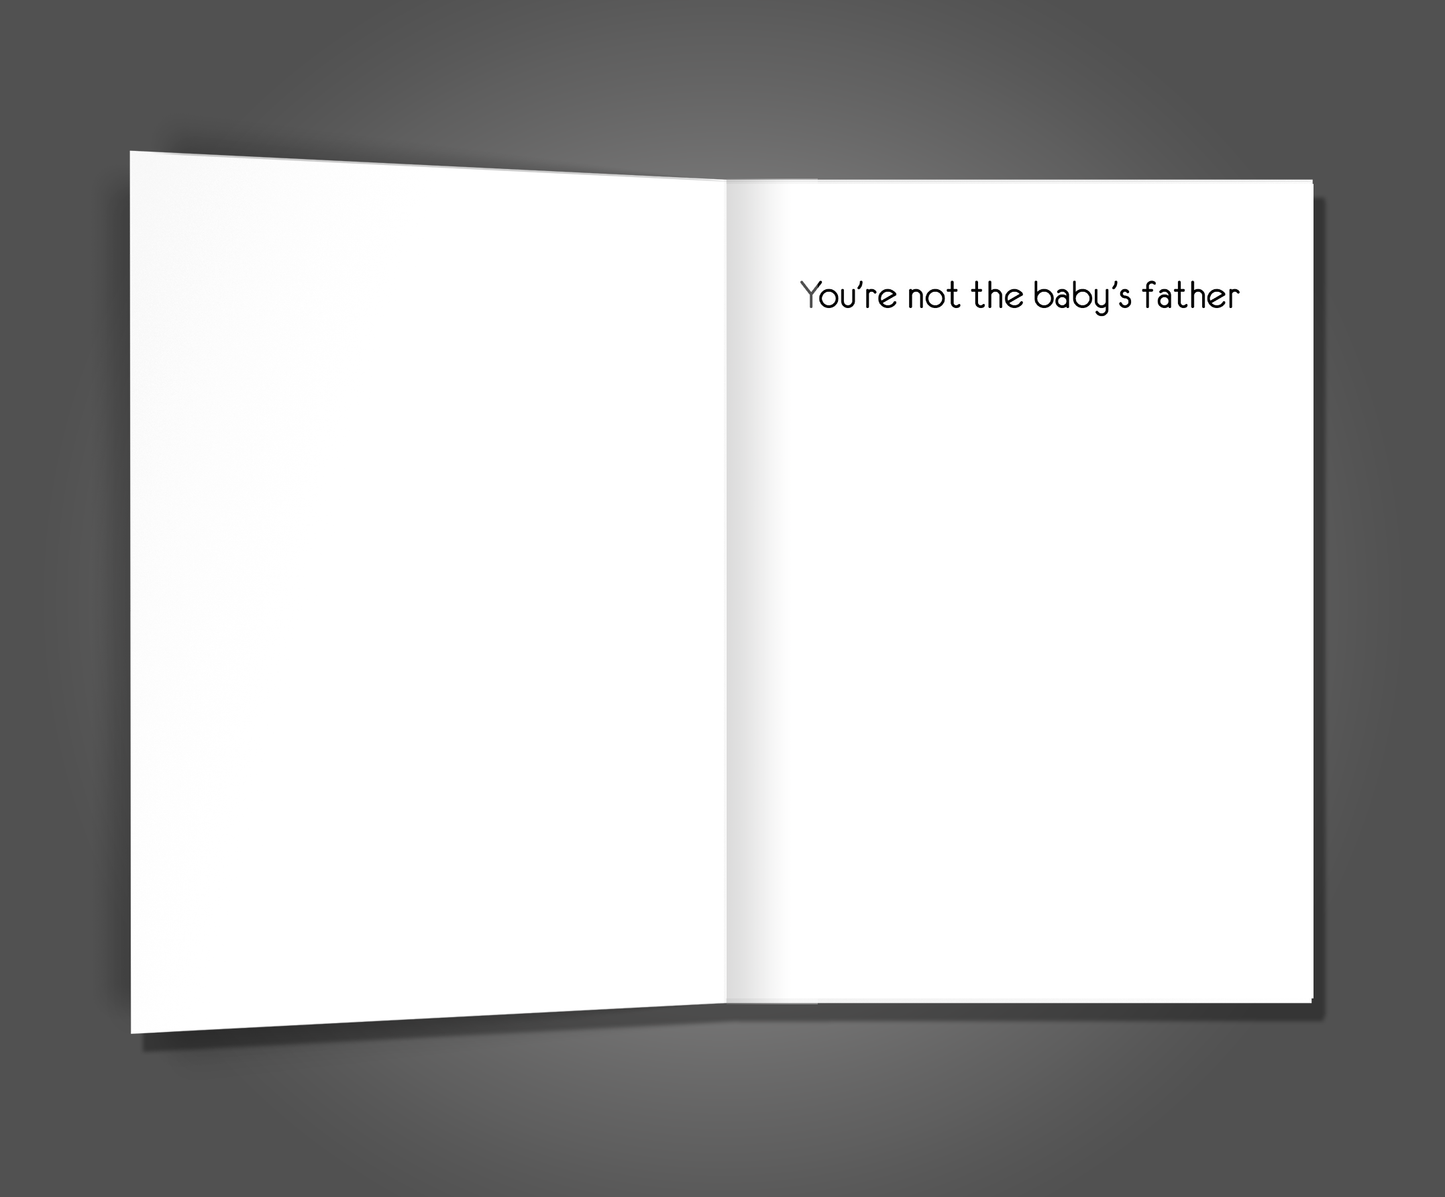 Maury Povich Style, New Baby Card